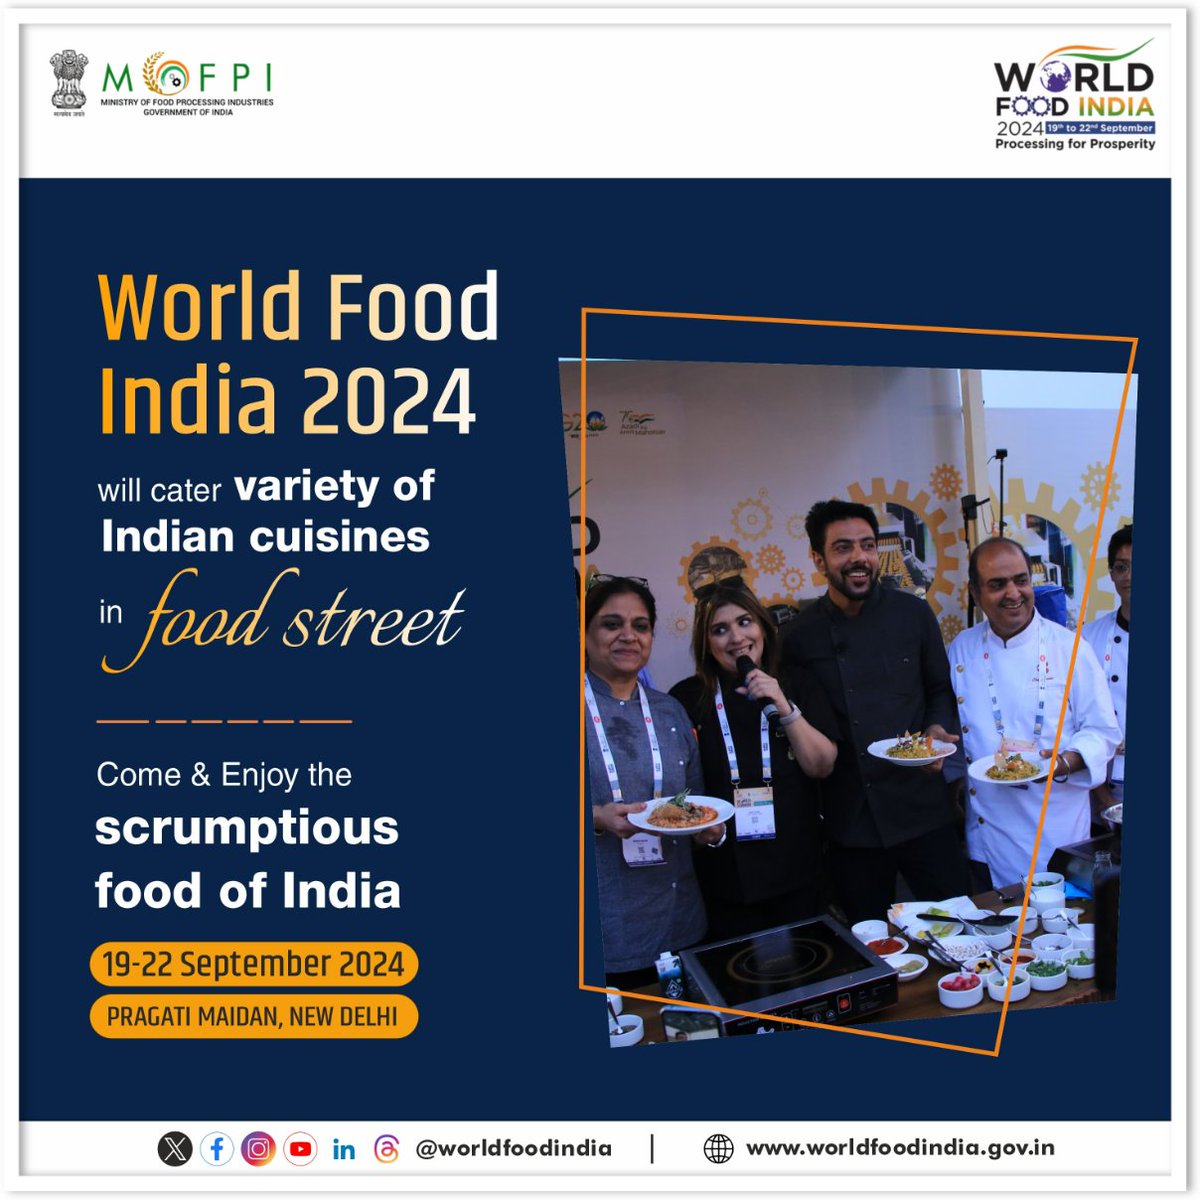 India's flourishing food industry at 𝐖𝐨𝐫𝐥𝐝 𝐅𝐨𝐨𝐝 𝐈𝐧𝐝𝐢𝐚 𝟐𝟎𝟐𝟒 will take a step ahead. Do discover opportunities for growth and innovation.Visit worldfoodindia.gov.in for more details! @MOFPI_GOI @ficci_india @investindia @MyGovHindi @AgriGoI #WorldFoodIndia2024